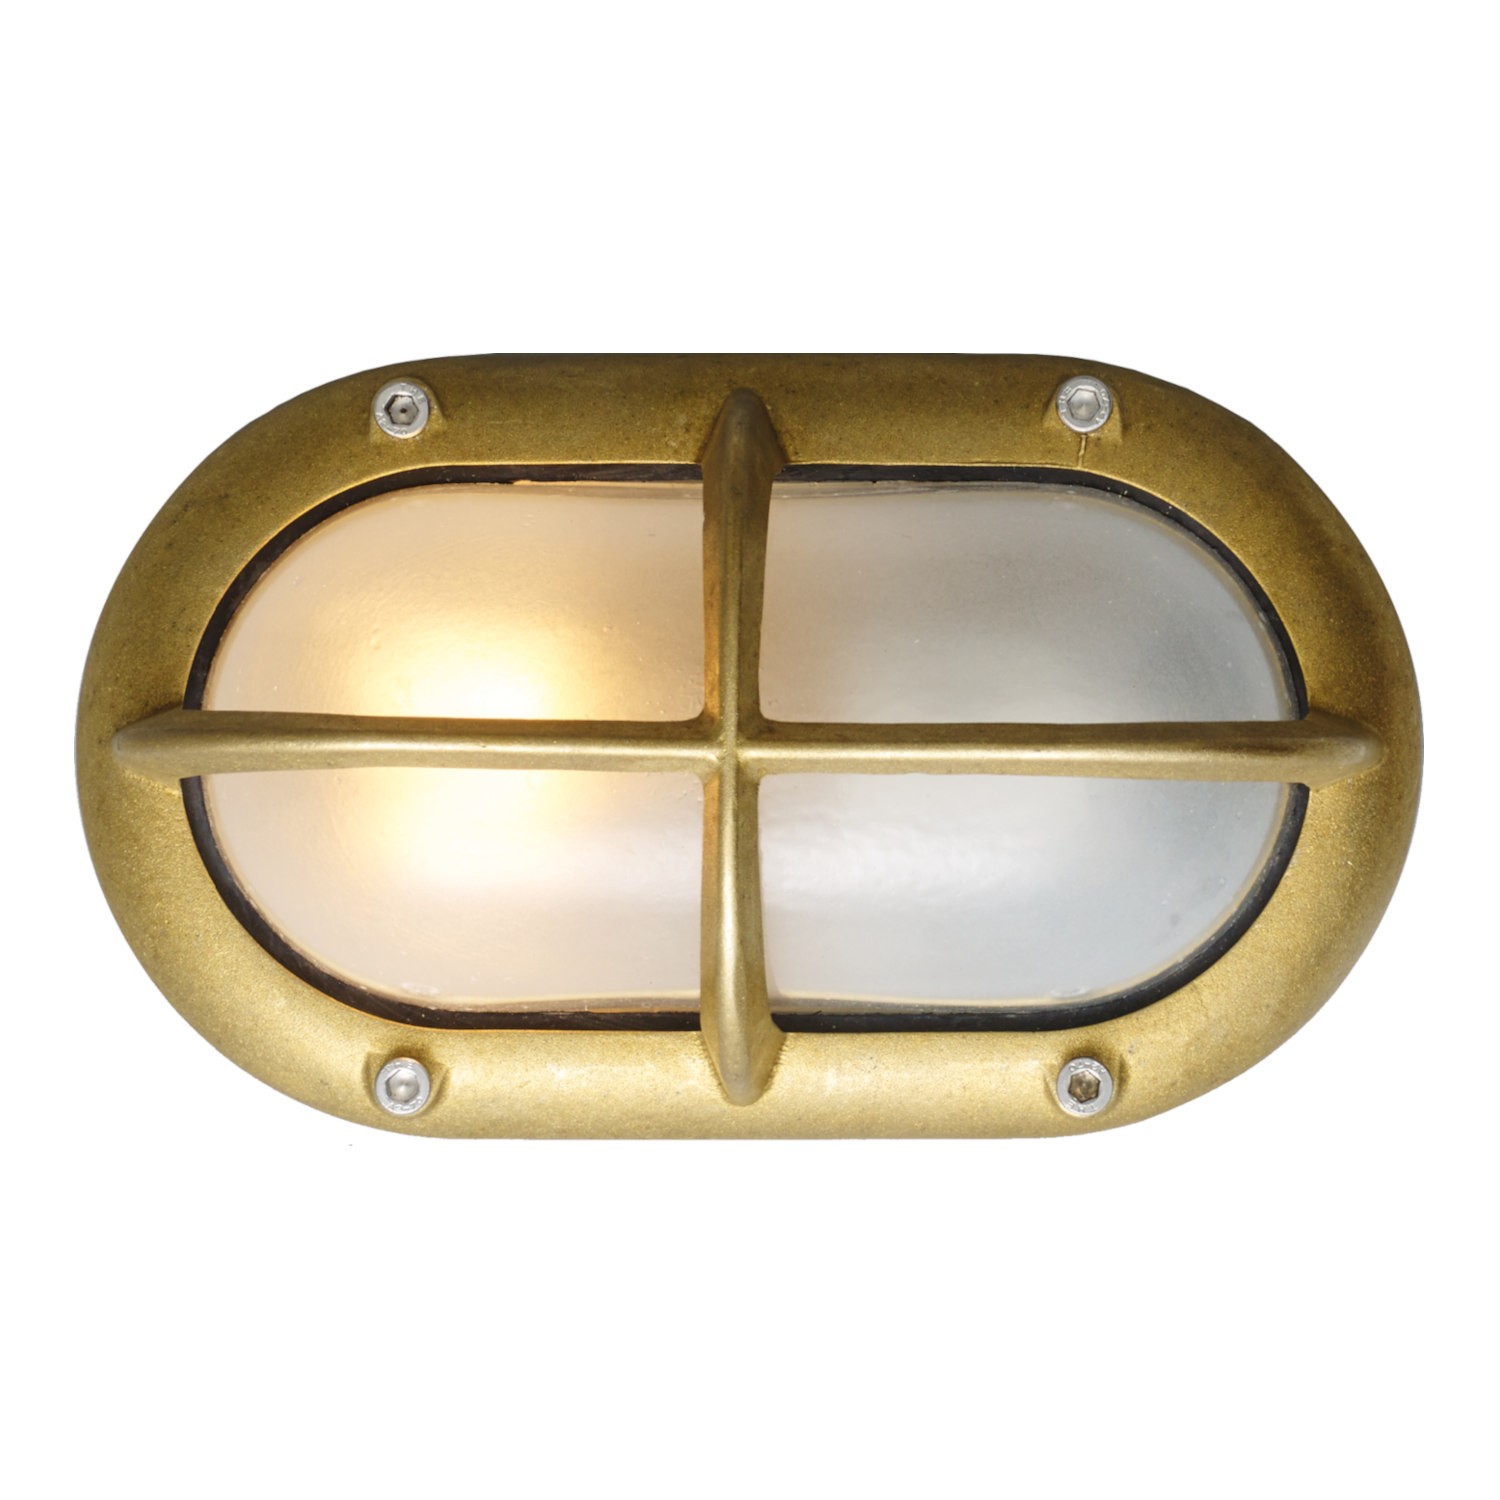 Small Oval Ceiling Light with Cross Guard 8123